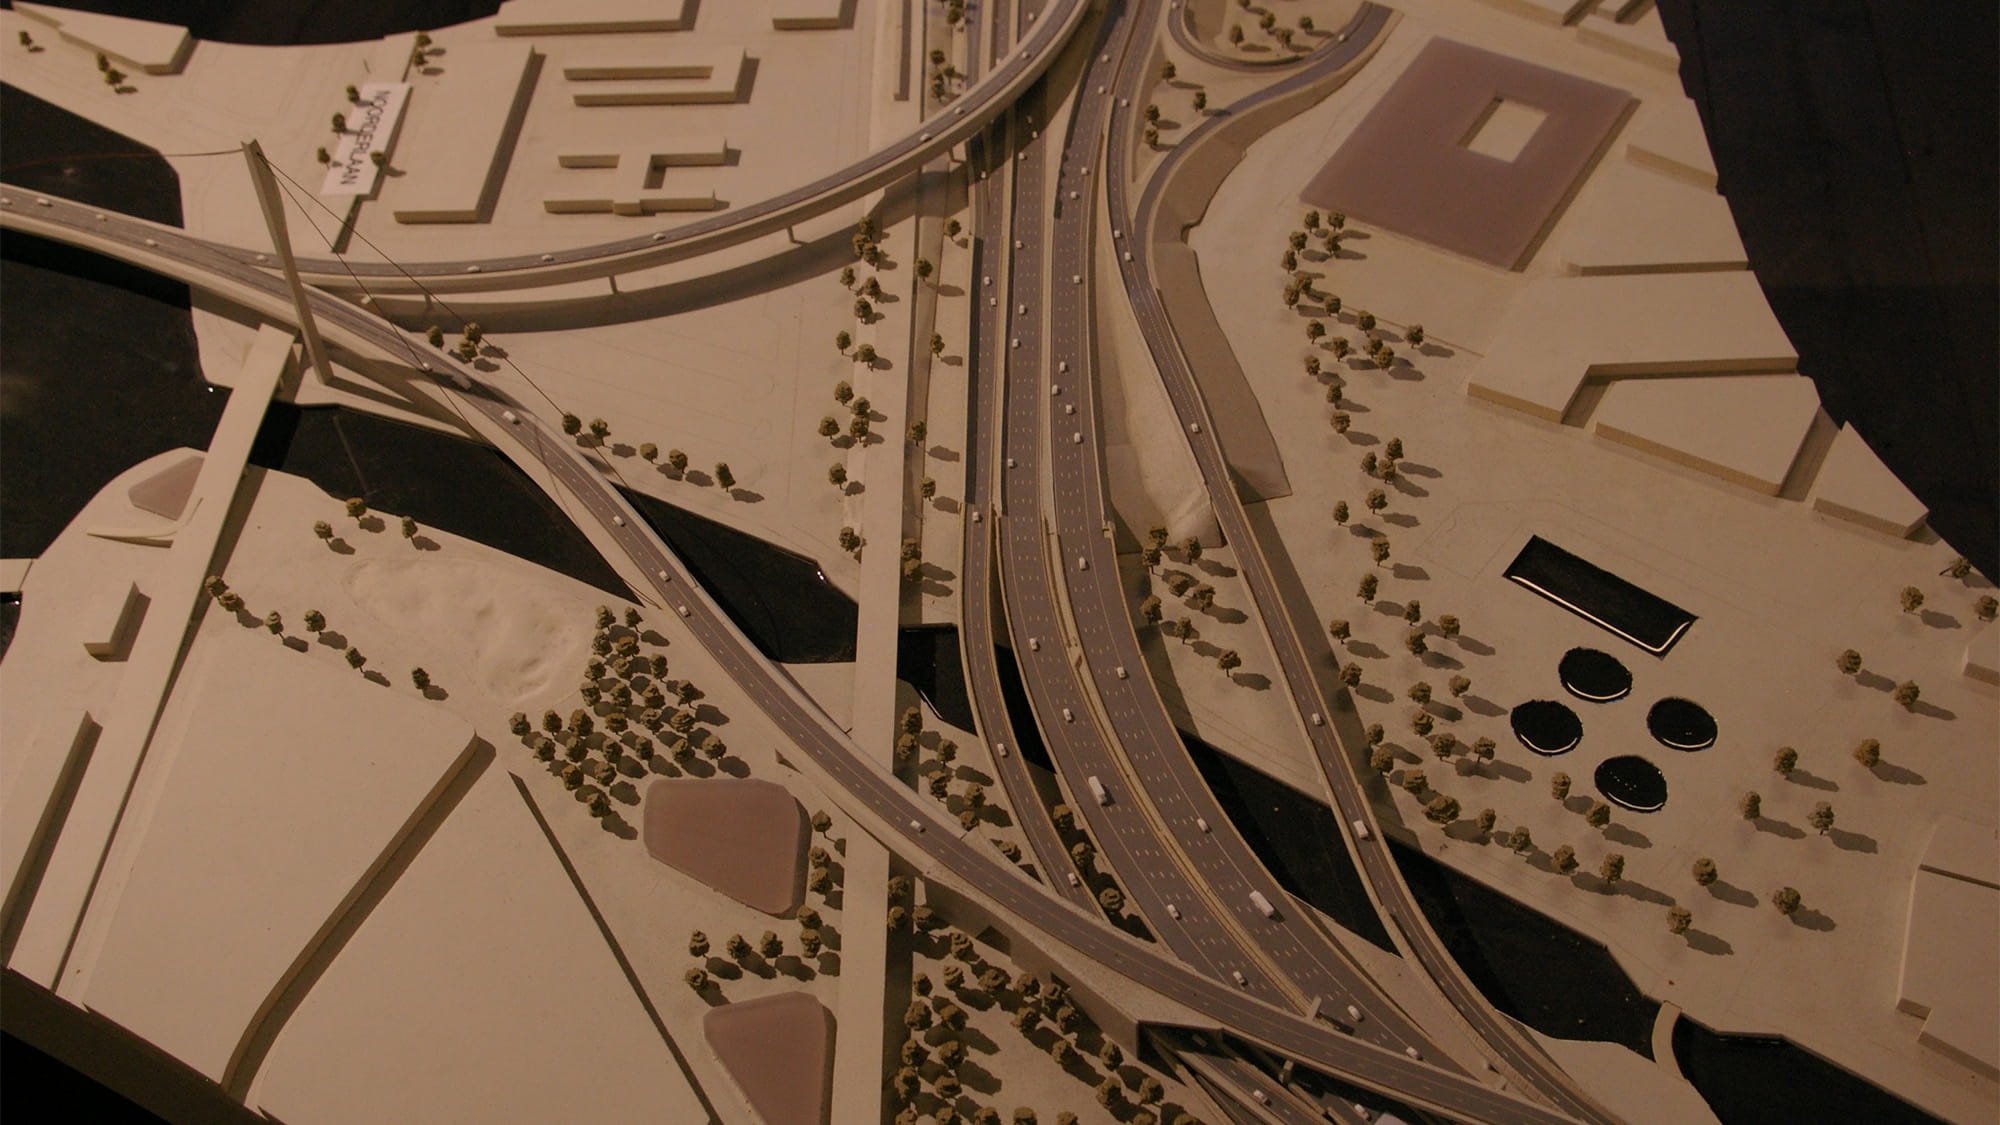 Our integral approach included technical expertise on the covering structure itself, traffic engineering, highway design and masterplanning, including underground interchanges and highway ramps.